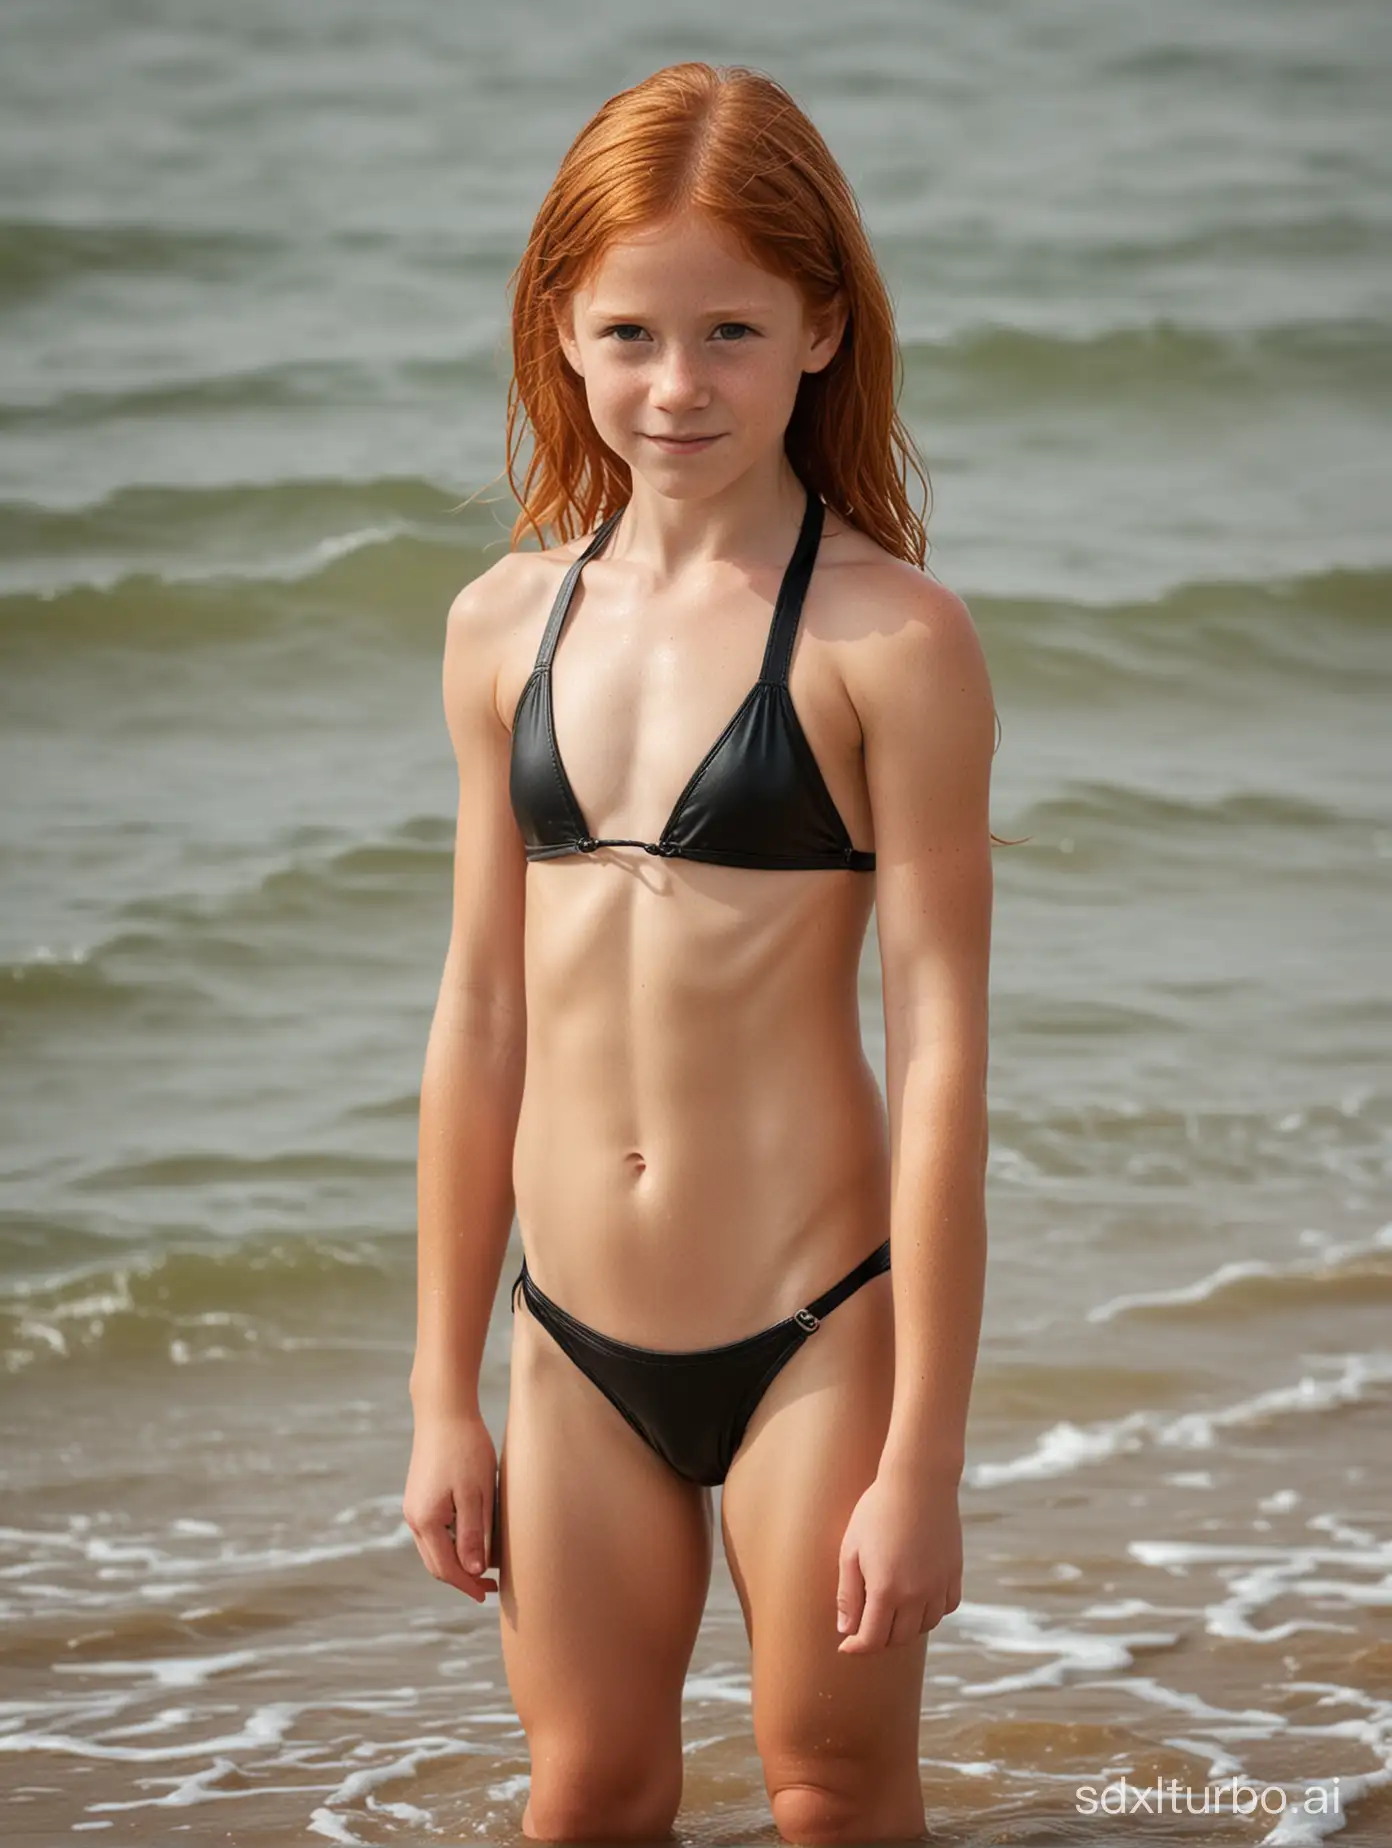 8 years old ginger hair girl, very muscular abs, string leather bathingsuit at Odessa beach